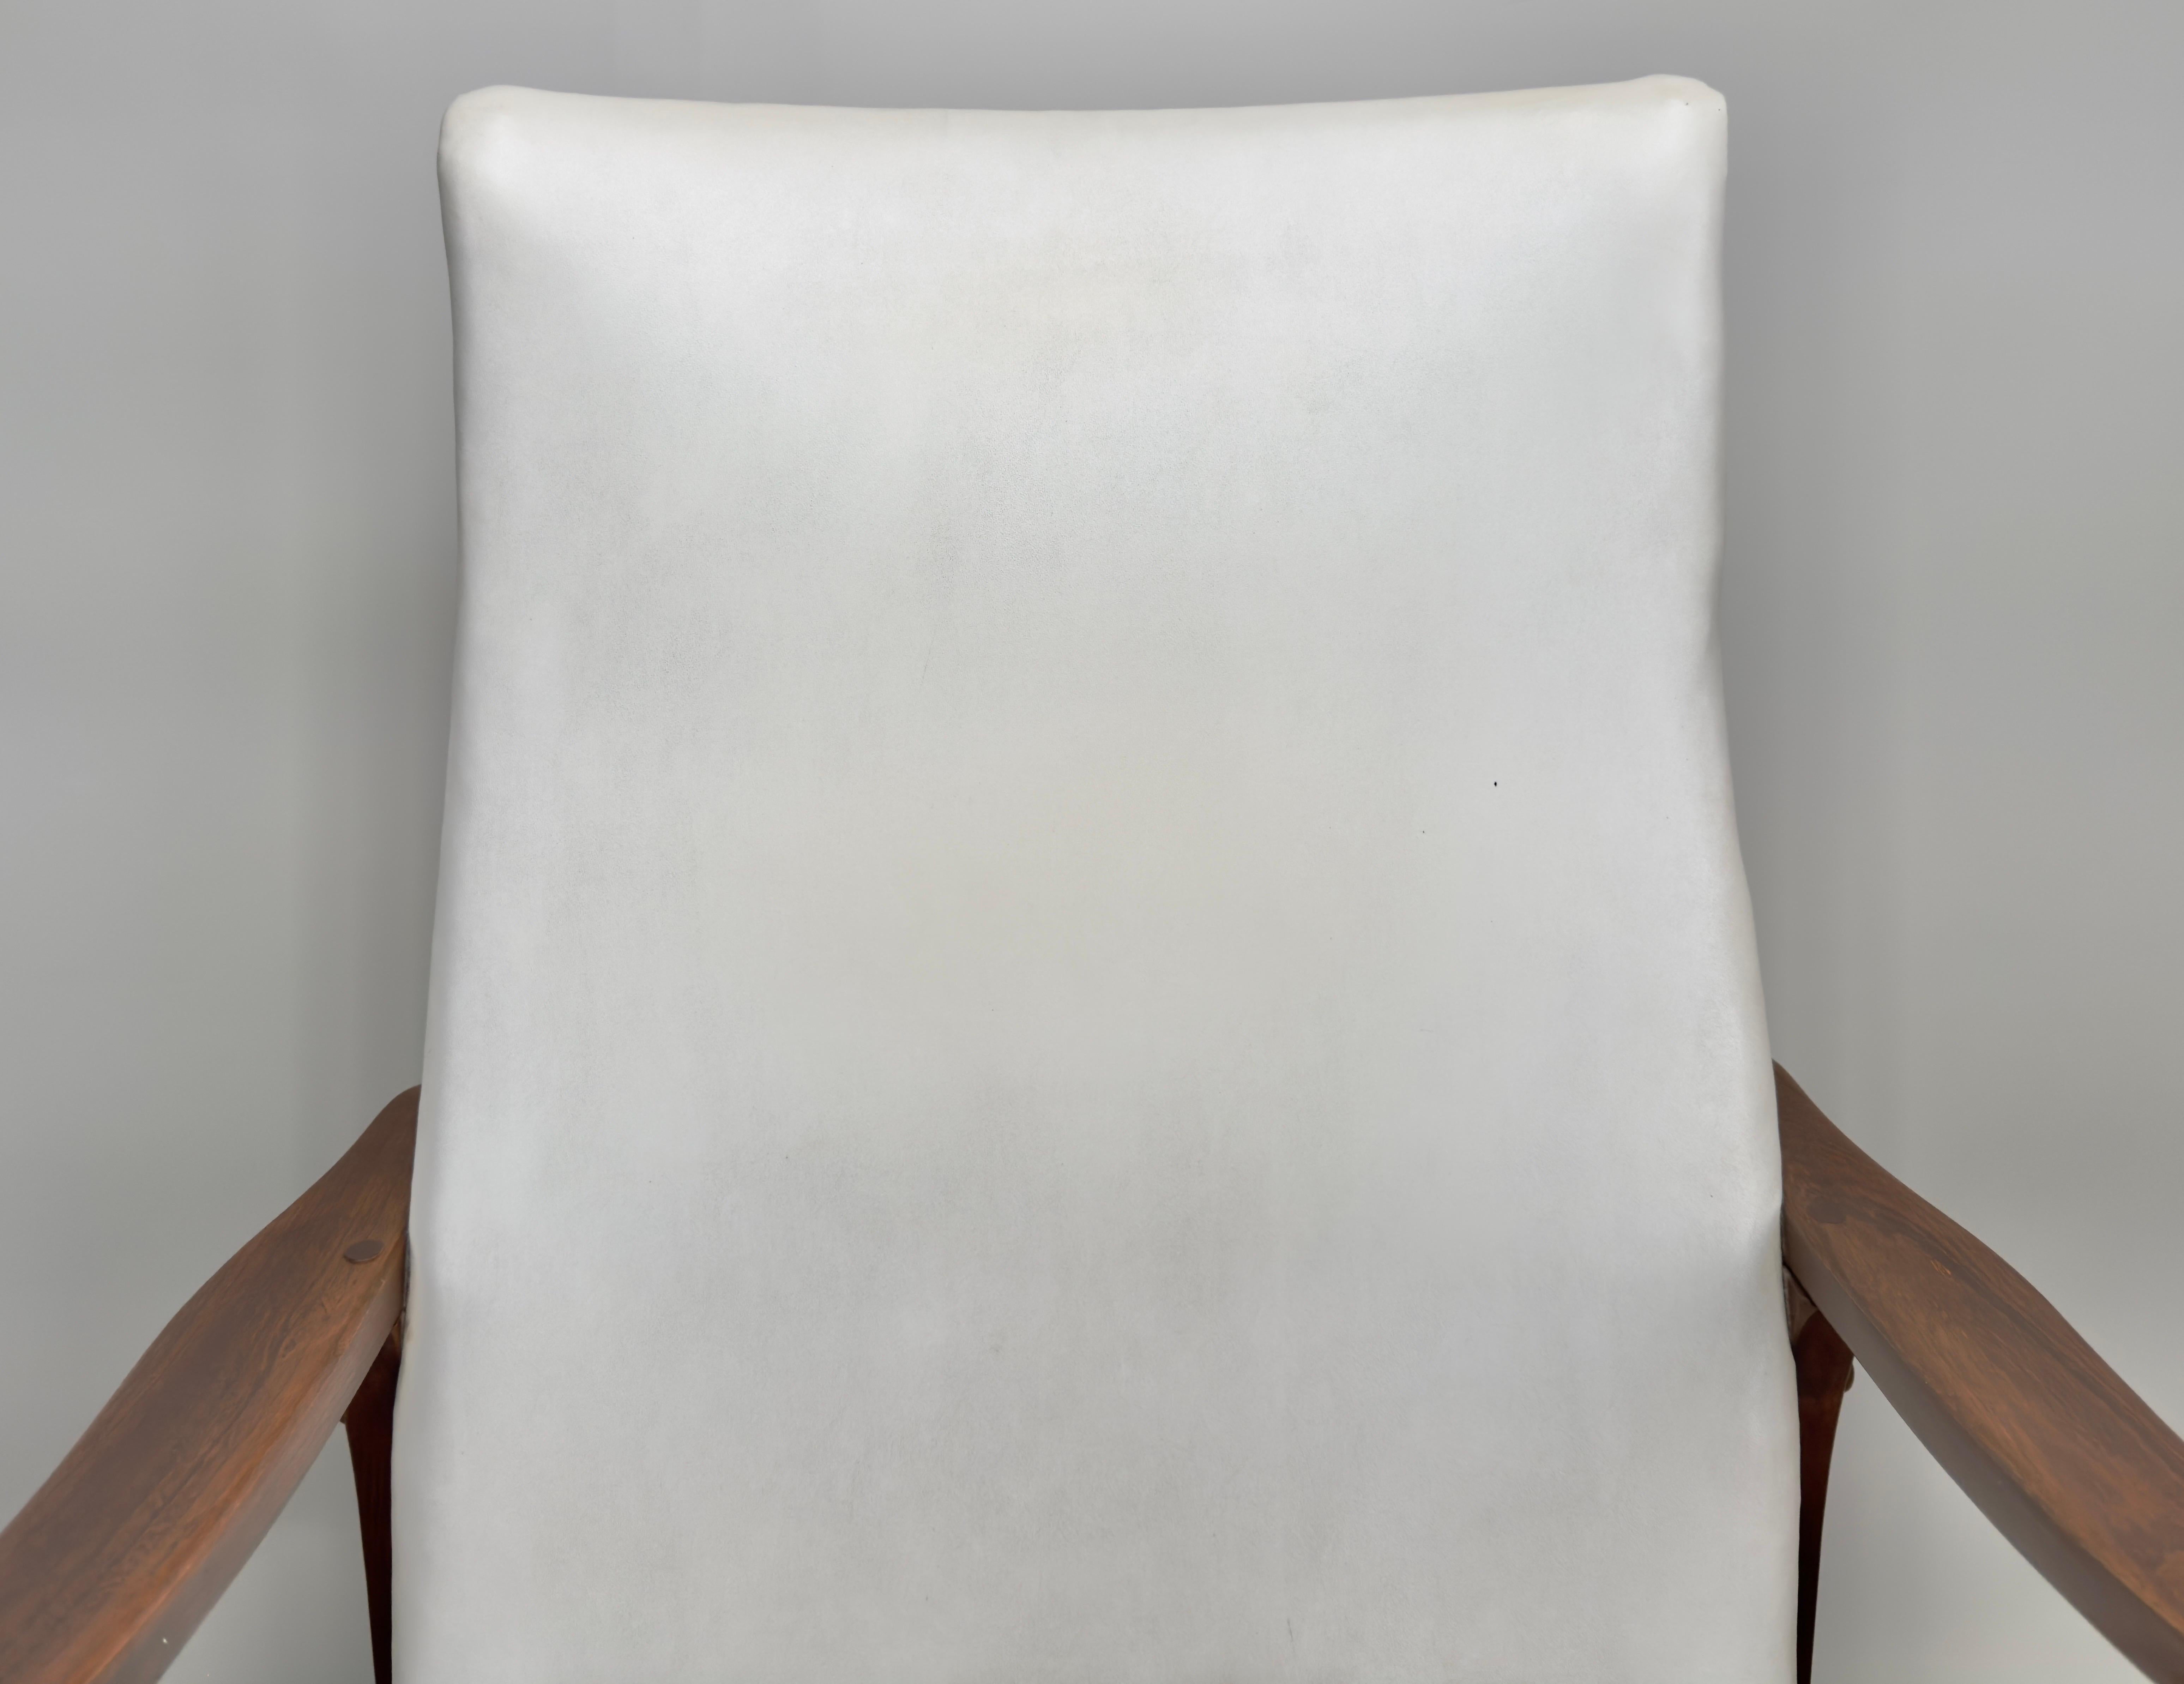 Naugahyde Milo Baughman Style MCM in White Faux Leather Rocking Chair  For Sale